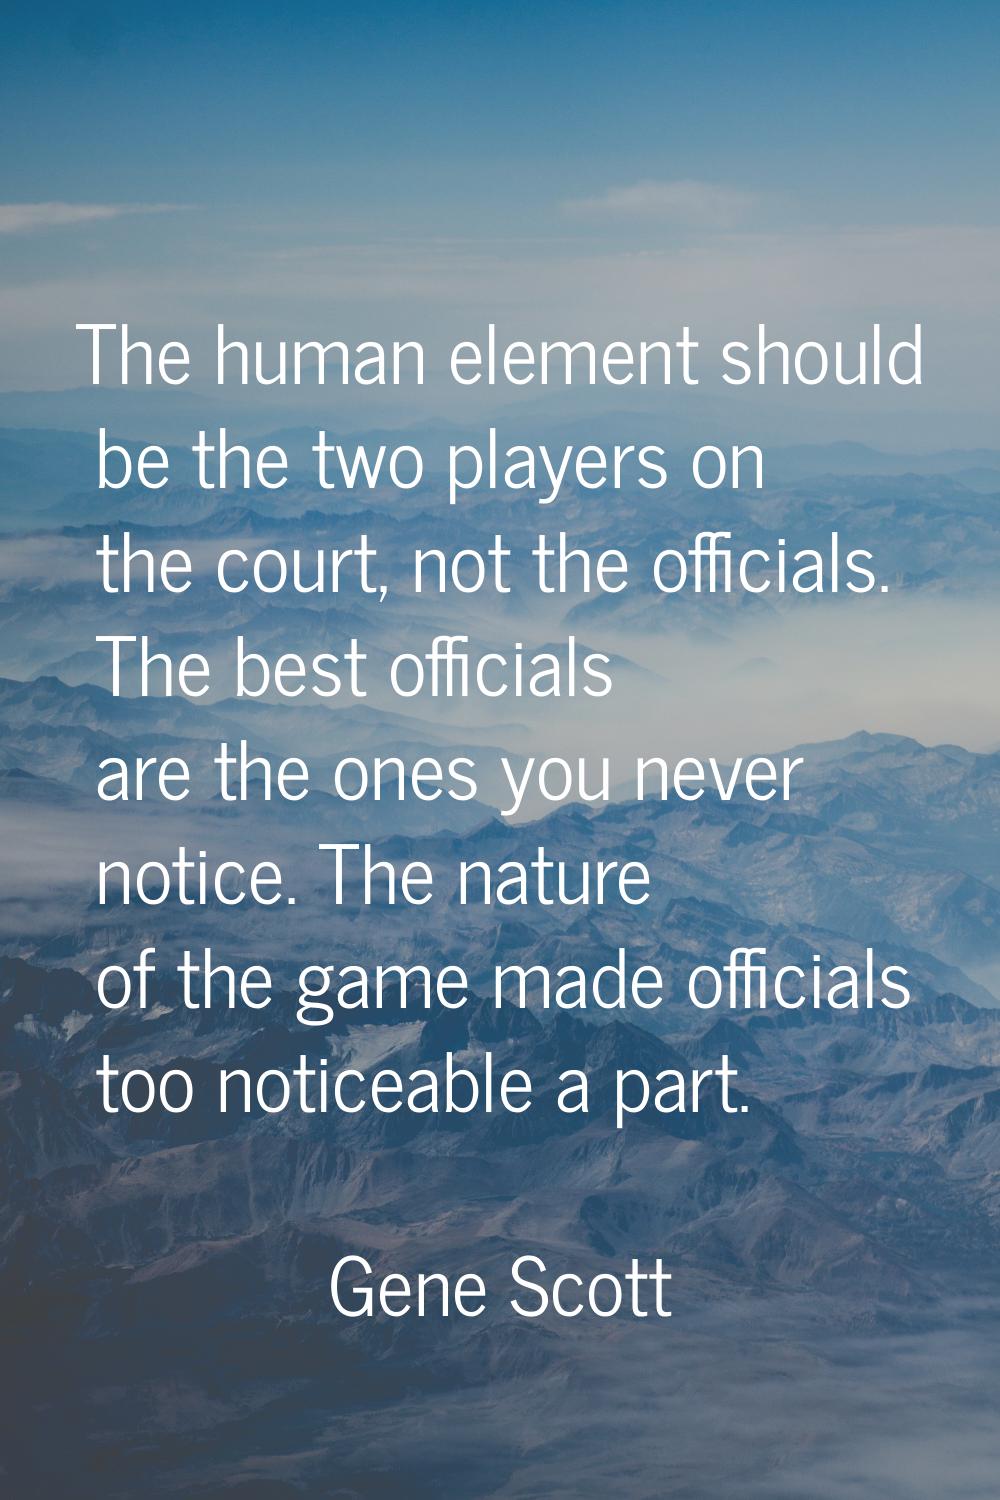 The human element should be the two players on the court, not the officials. The best officials are